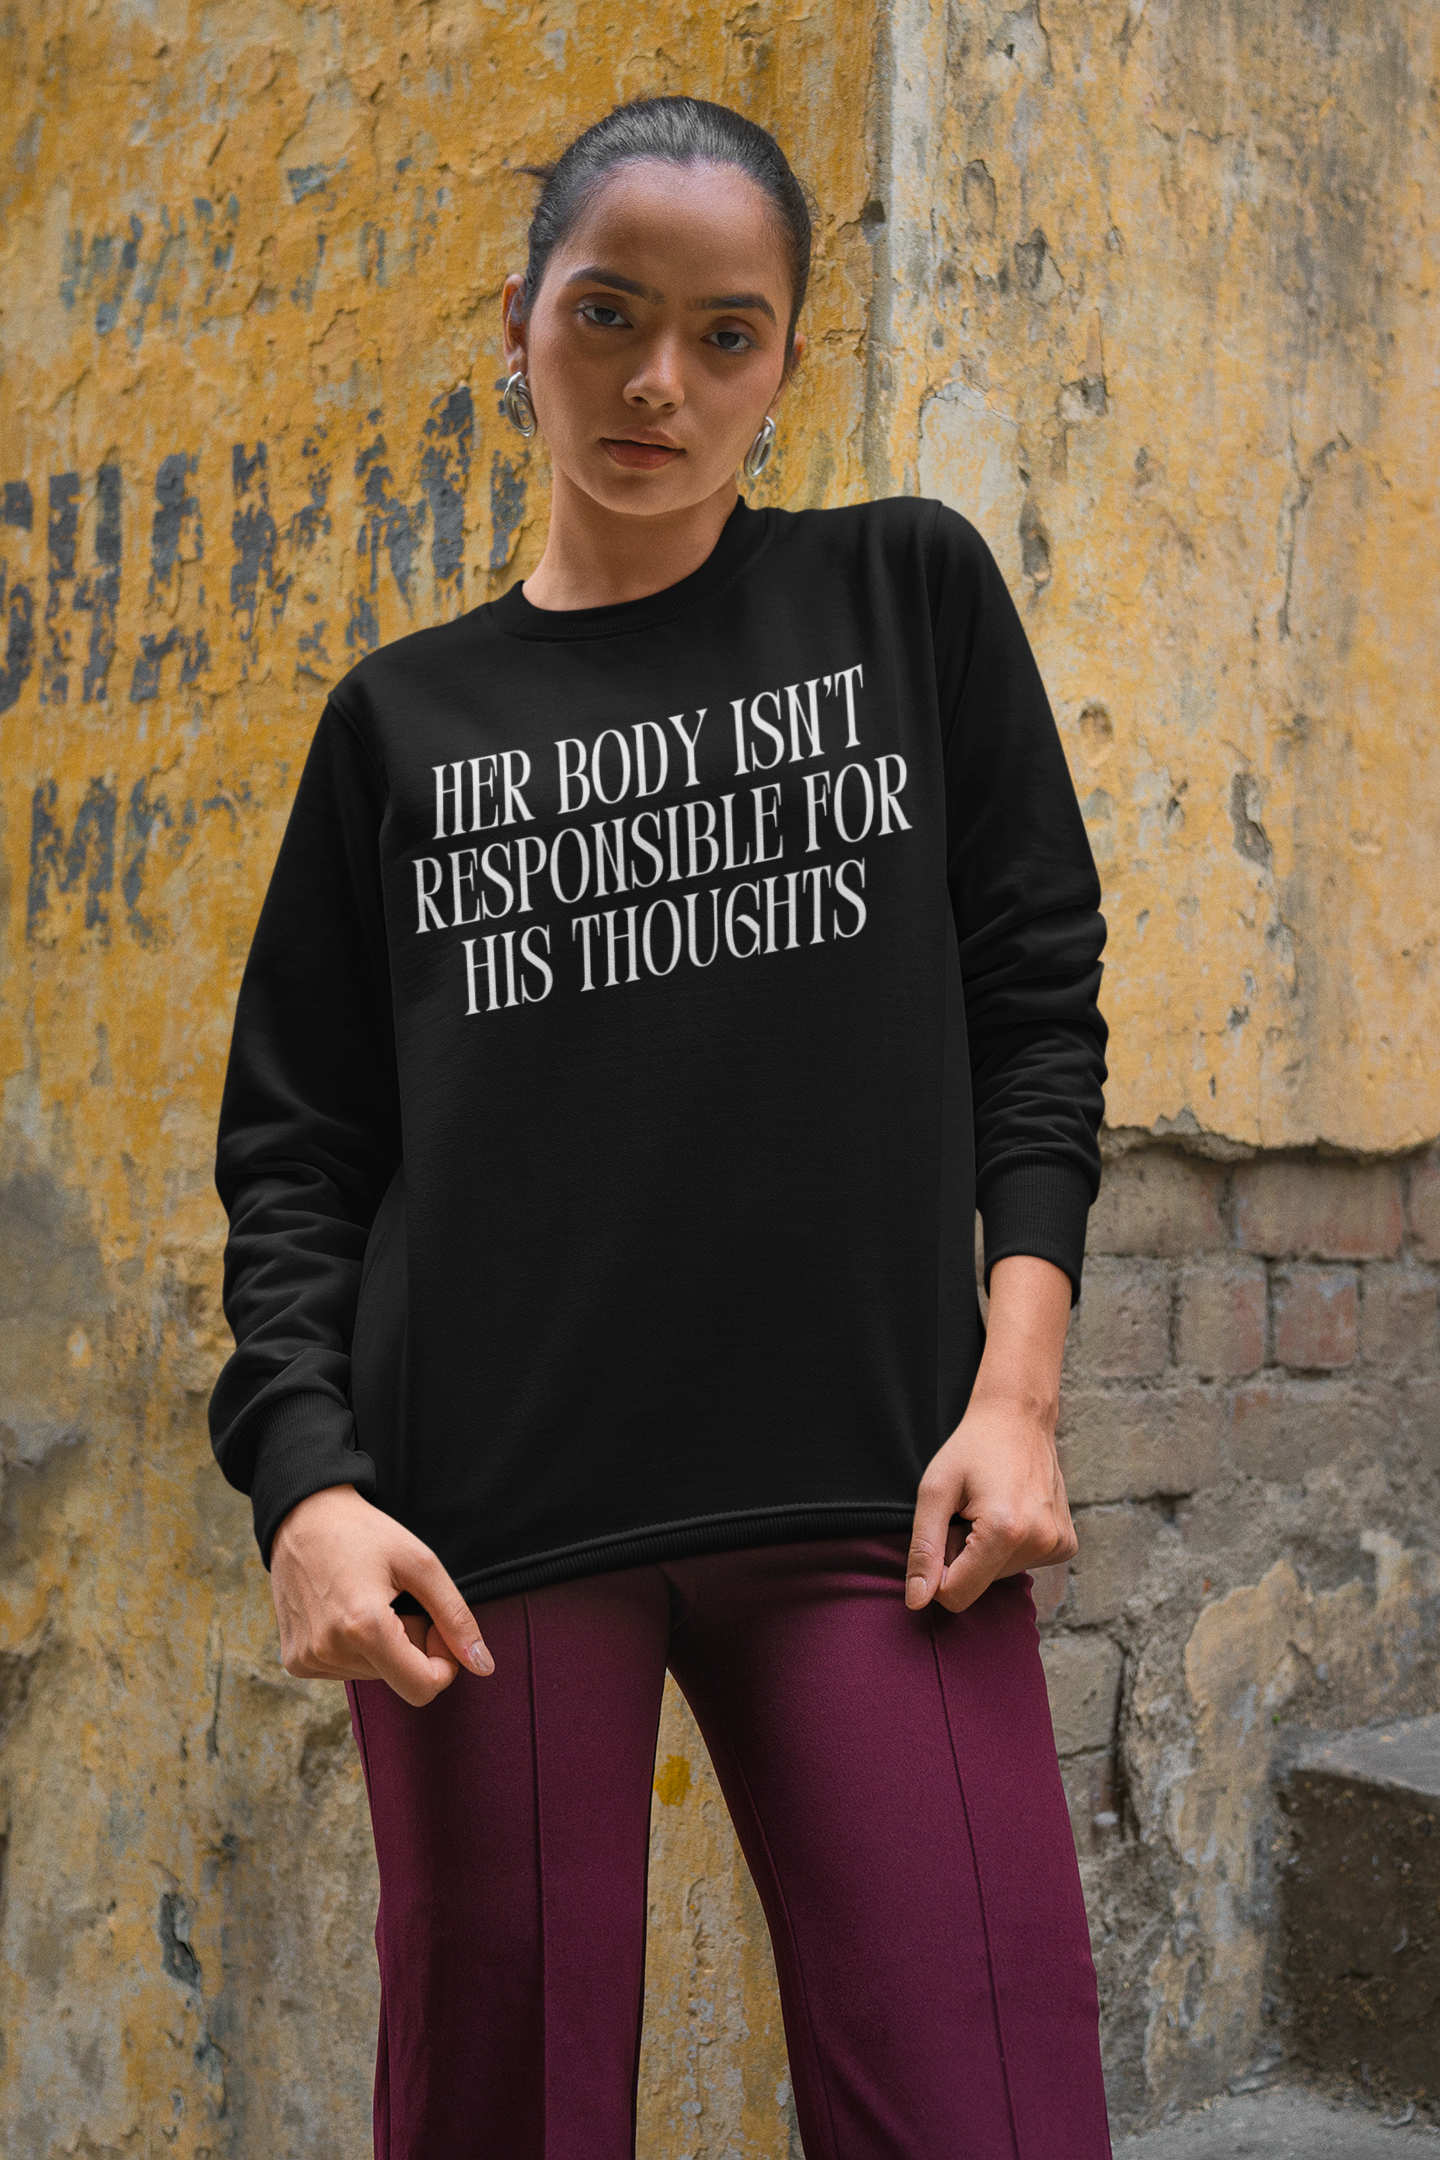 Her Body Isn’t Responsible For His Thoughts Unisex Feminist Sweatshirt - Shop Women’s Rights T-shirts - Feminist Trash Store - Oversized Black Sweatshirt